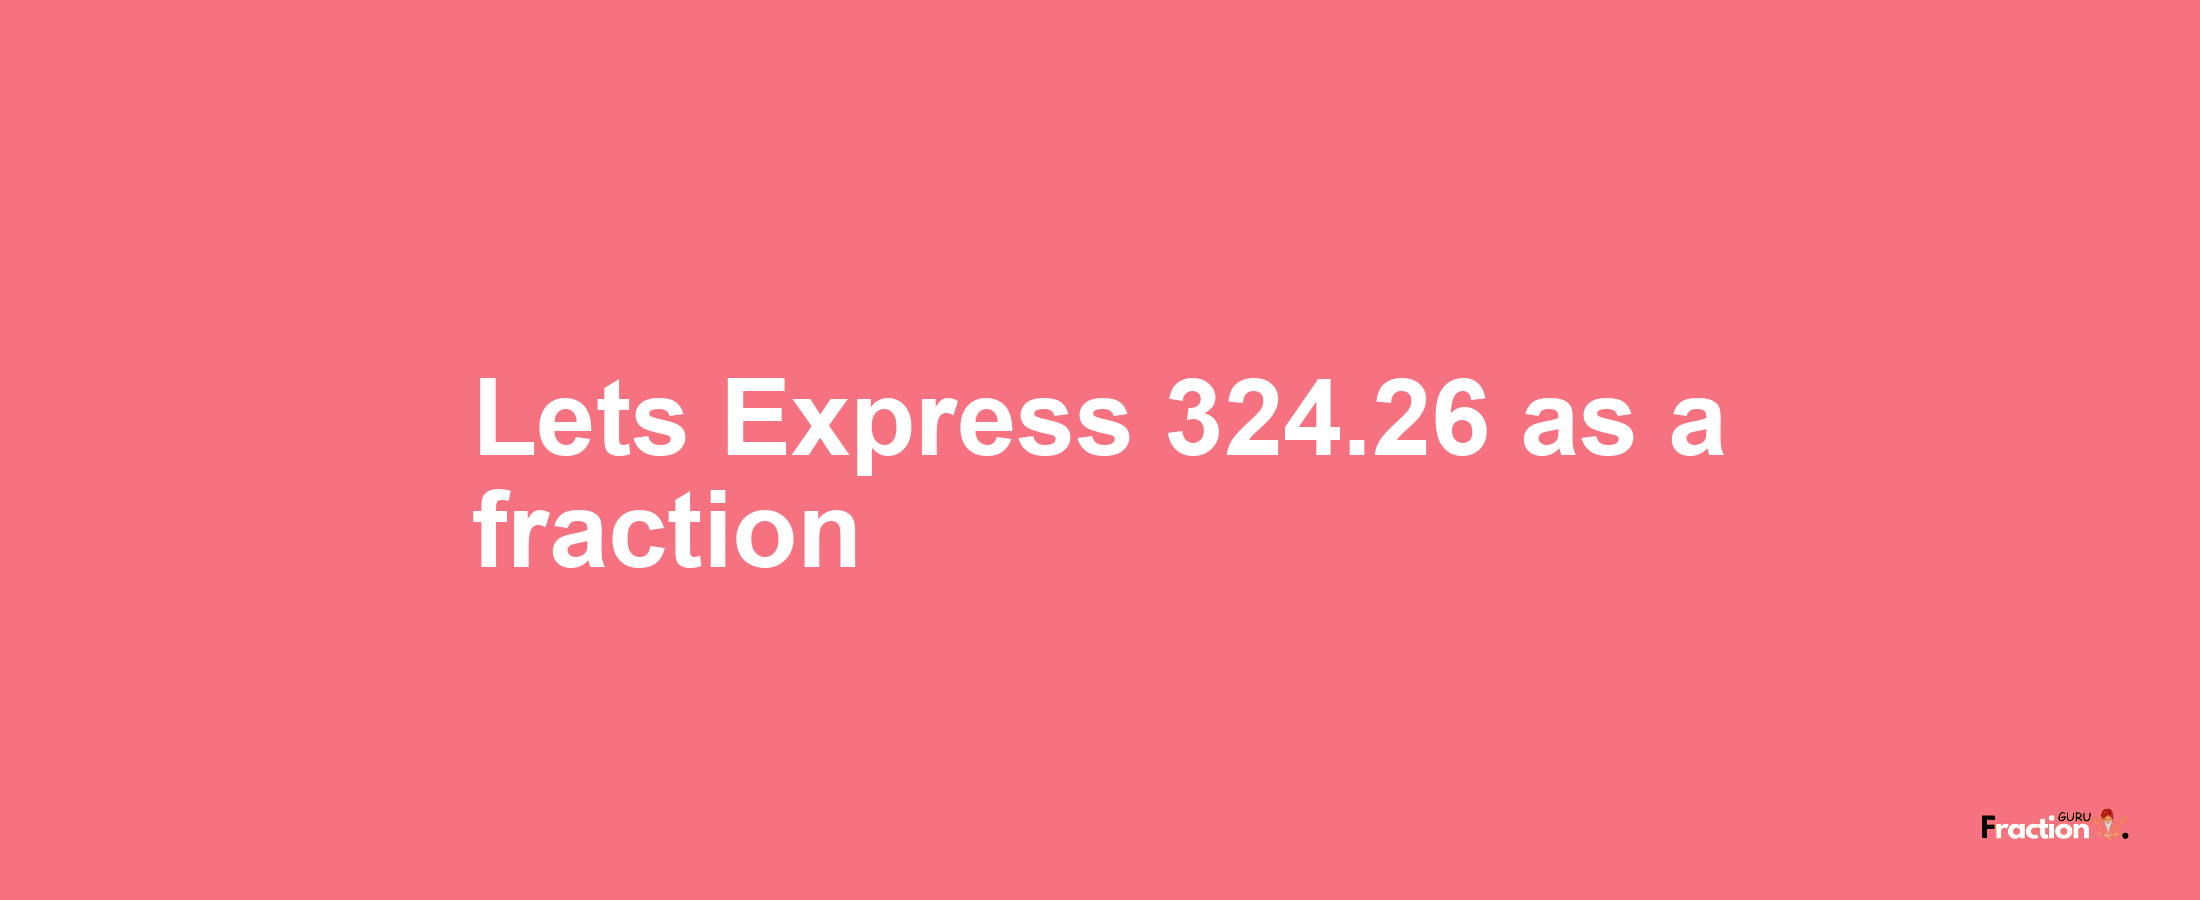 Lets Express 324.26 as afraction